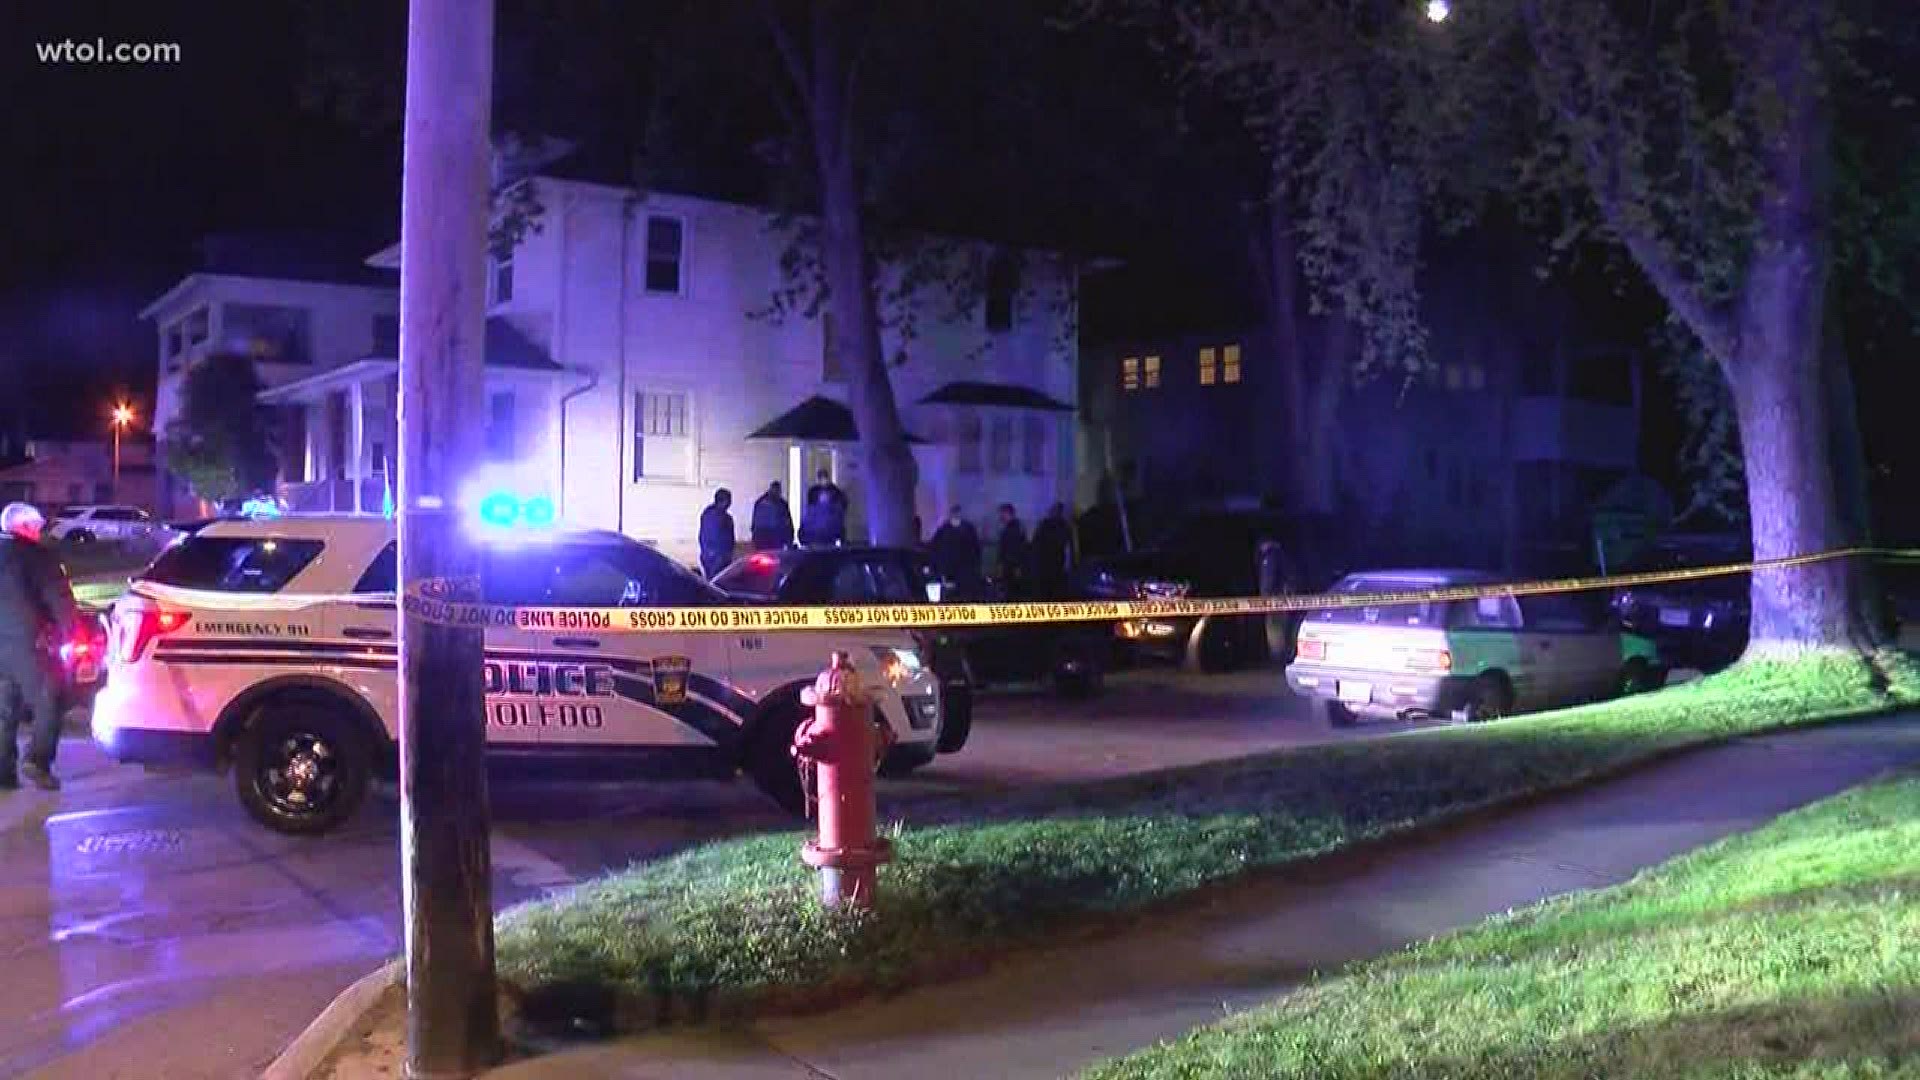 A shooting took place at 10:30 p.m. and the victim's condition is unknown. A man in his 30s died at his home in a different incident, according to officers.